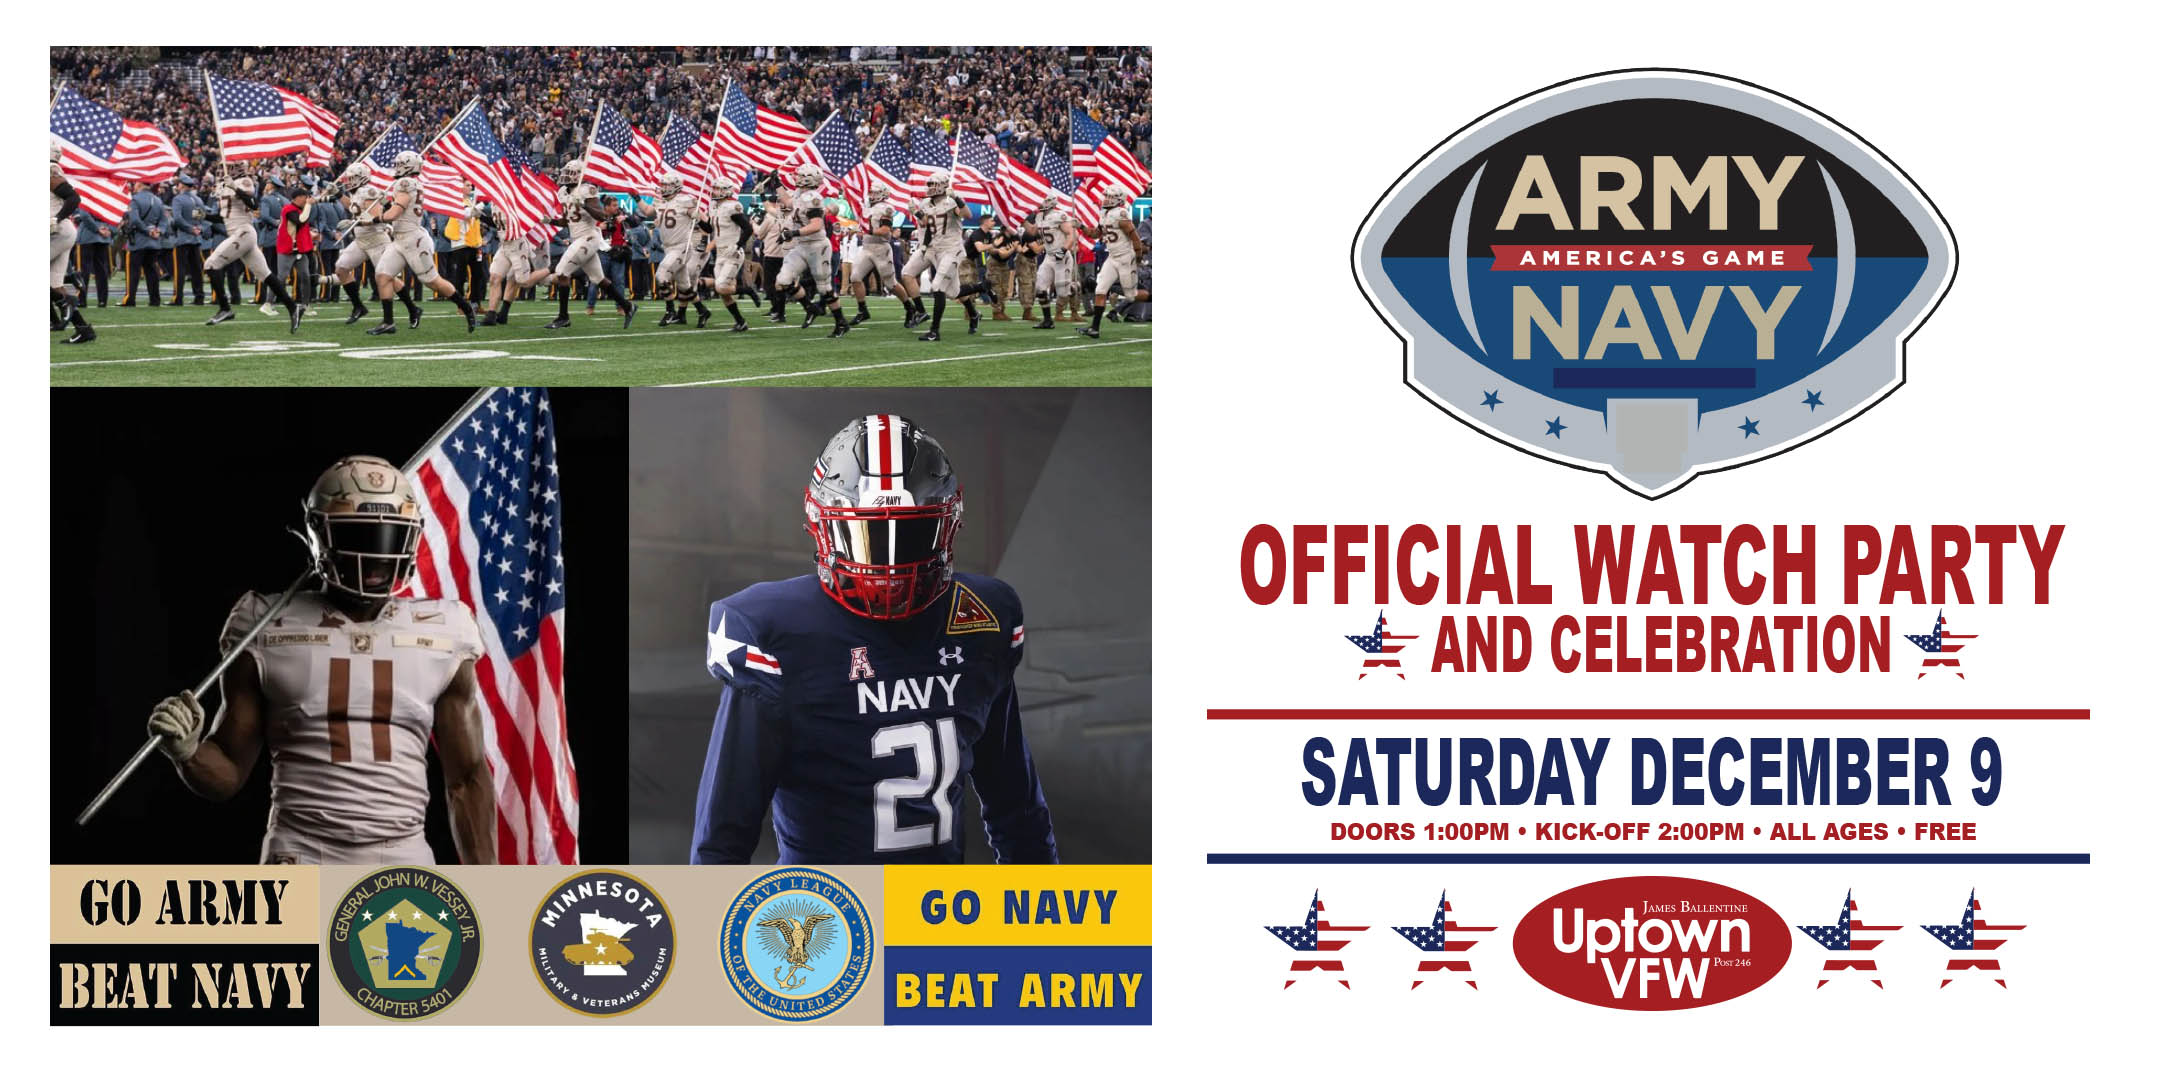 Army-Navy Football Game Official Watch Party and Celebration Saturday, December 9 James Ballentine "Uptown" VFW Post 246 Doors 1:00pm :: Kick-Off 2:00pm :: All Ages Admission is Free with Registration (Donations Accepted)